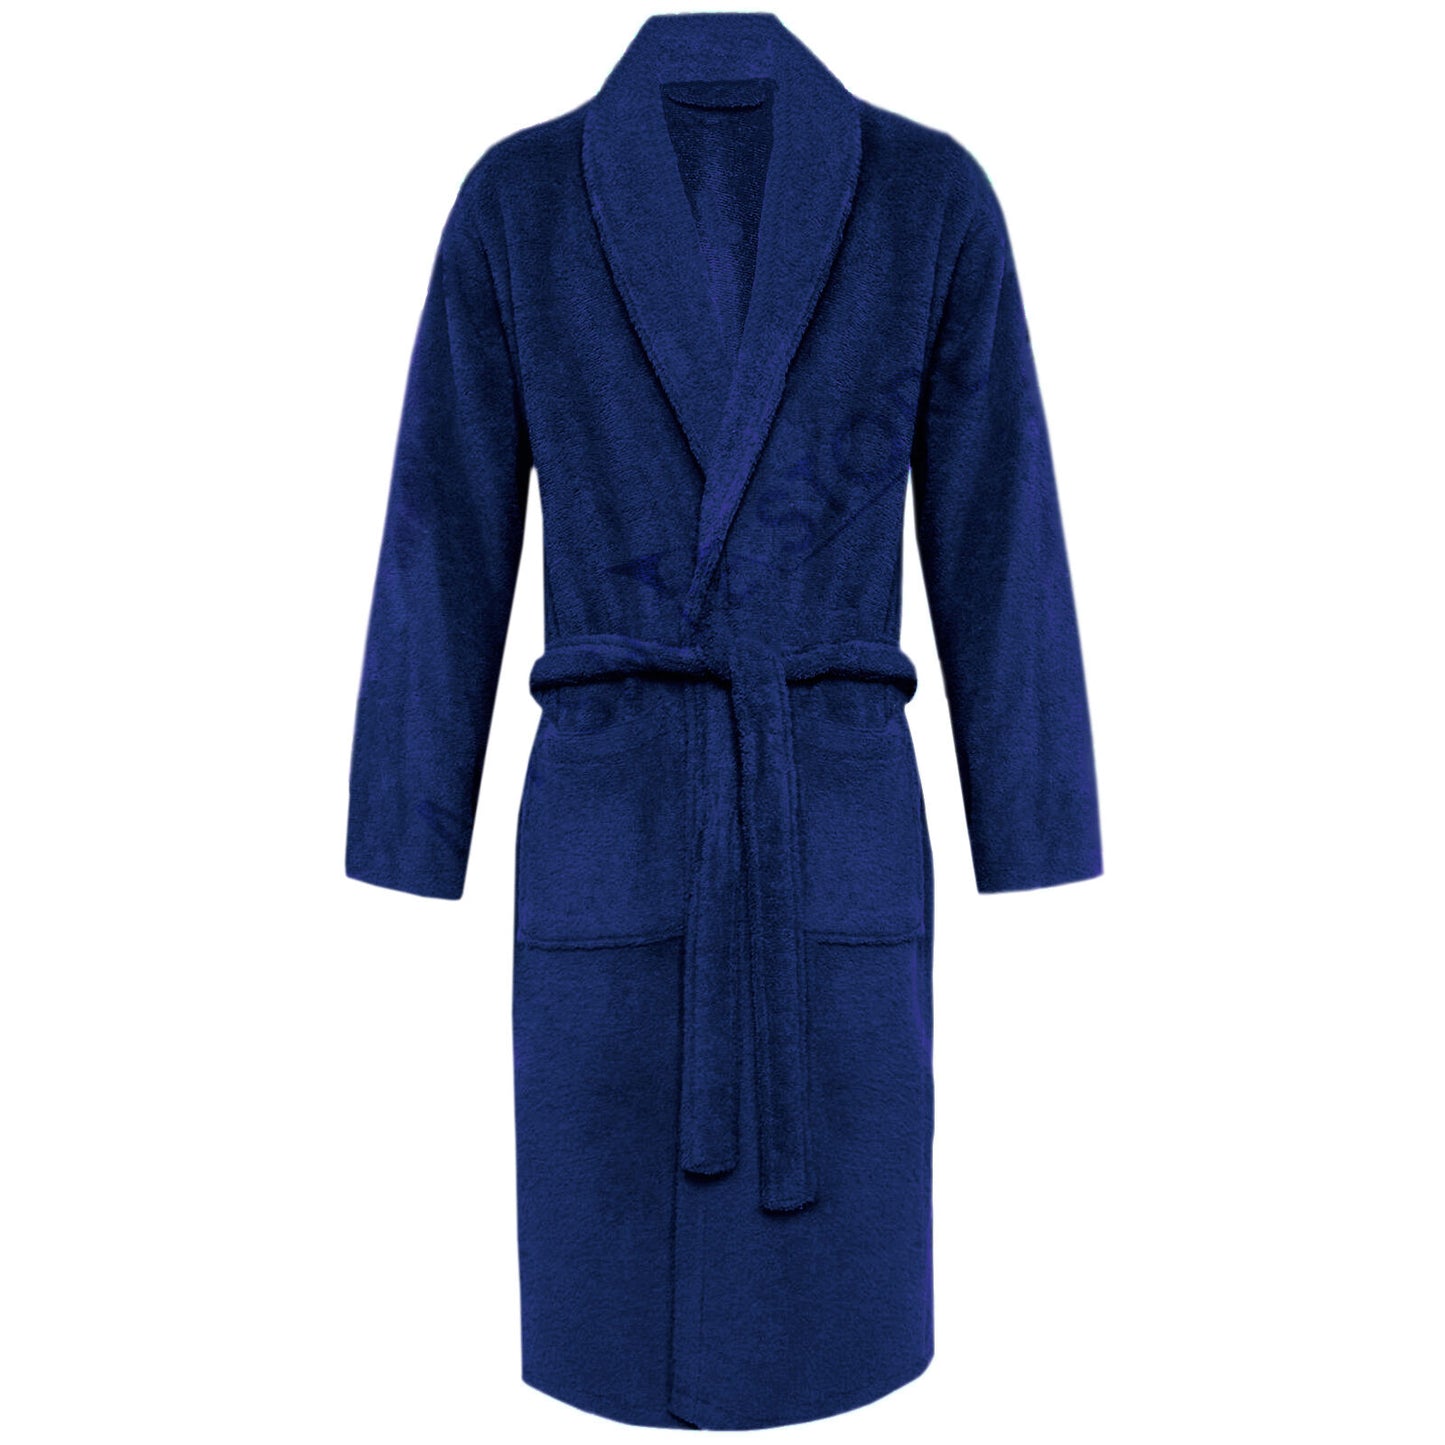 UNISEX LUXURY EGYPTIAN COTTON TERRY TOWELLING BATH ROBE DRESSING GOWN TOWEL SOFT